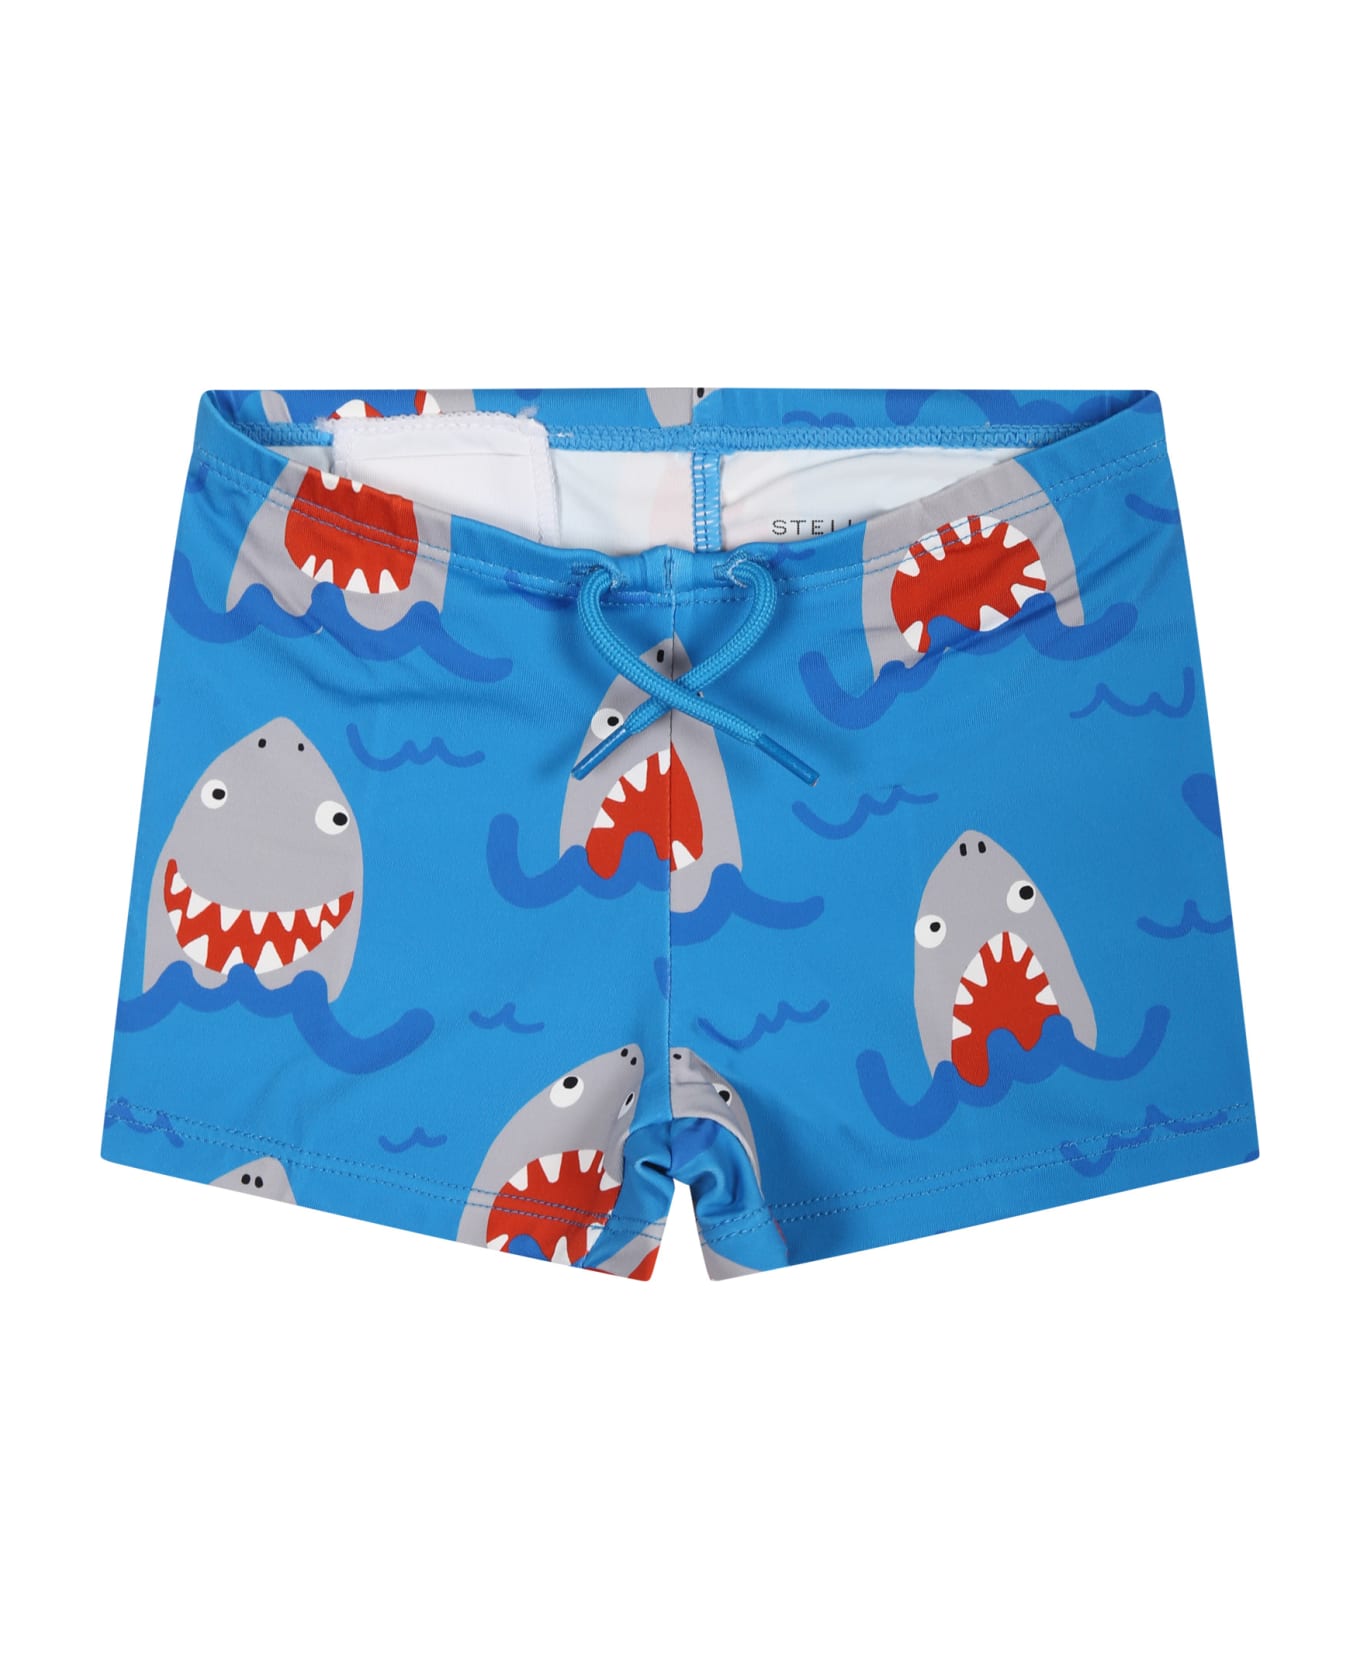 Stella McCartney Kids Light Blue Boxer Shorts For Baby Boy With All-over Shark Print - BLUE